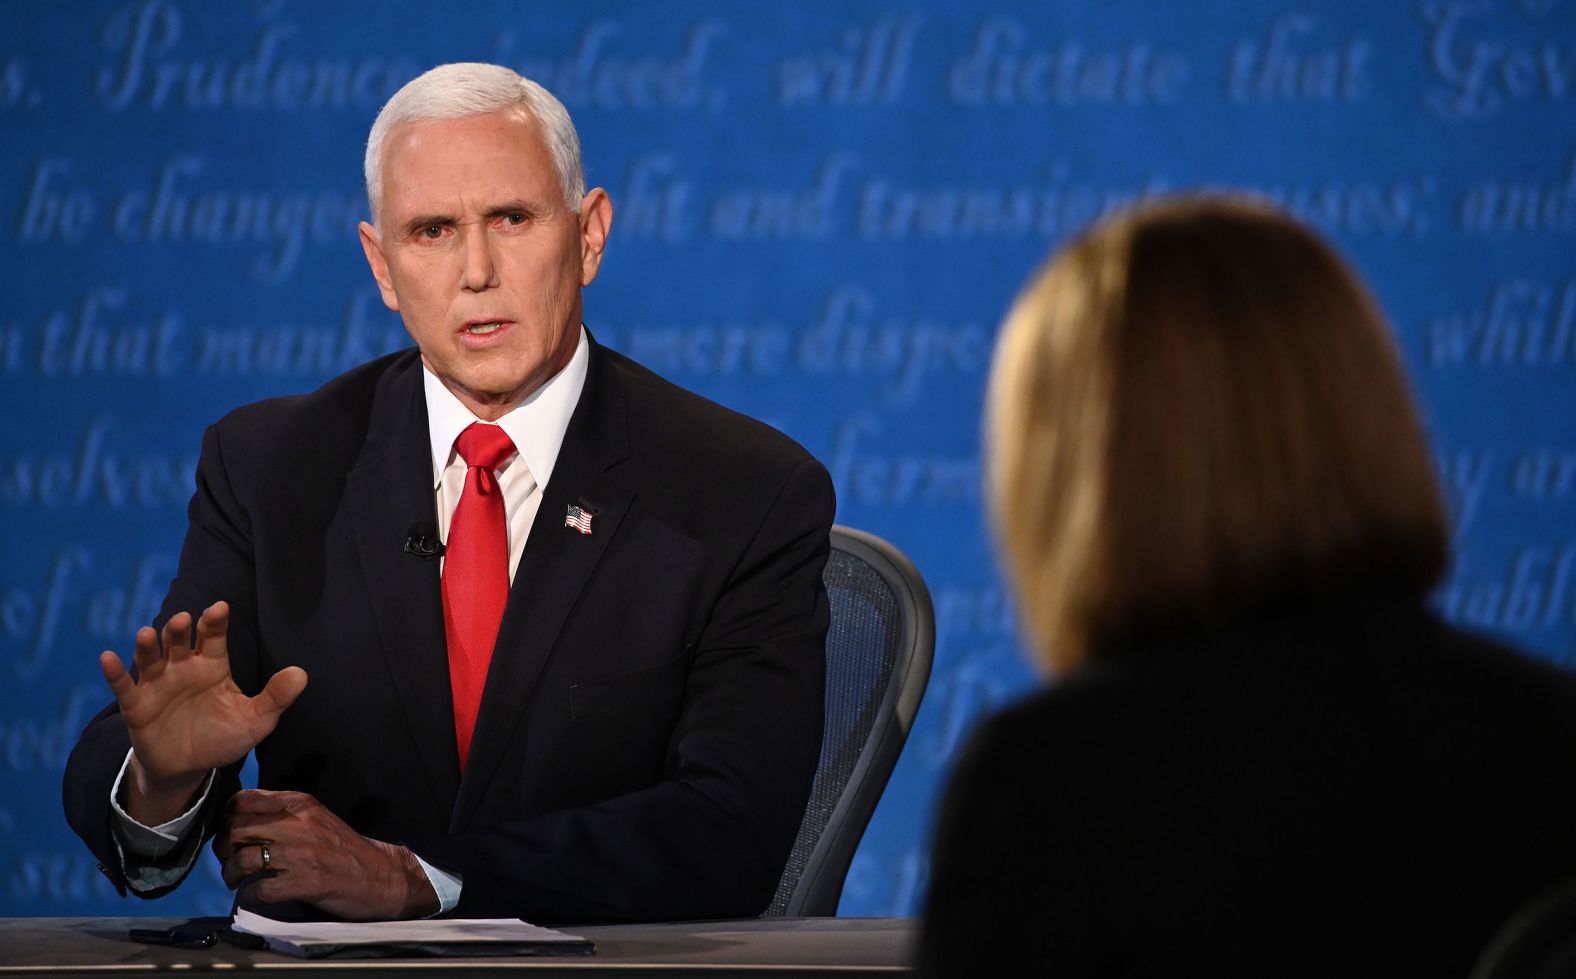 Pence debates US Sen. Kamala Harris at the <a href="index.php?page=&url=http%3A%2F%2Fwww.cnn.com%2F2020%2F10%2F07%2Fpolitics%2Fgallery%2F2020-vice-presidential-debate%2Findex.html" target="_blank">vice presidential debate</a> in October 2020.